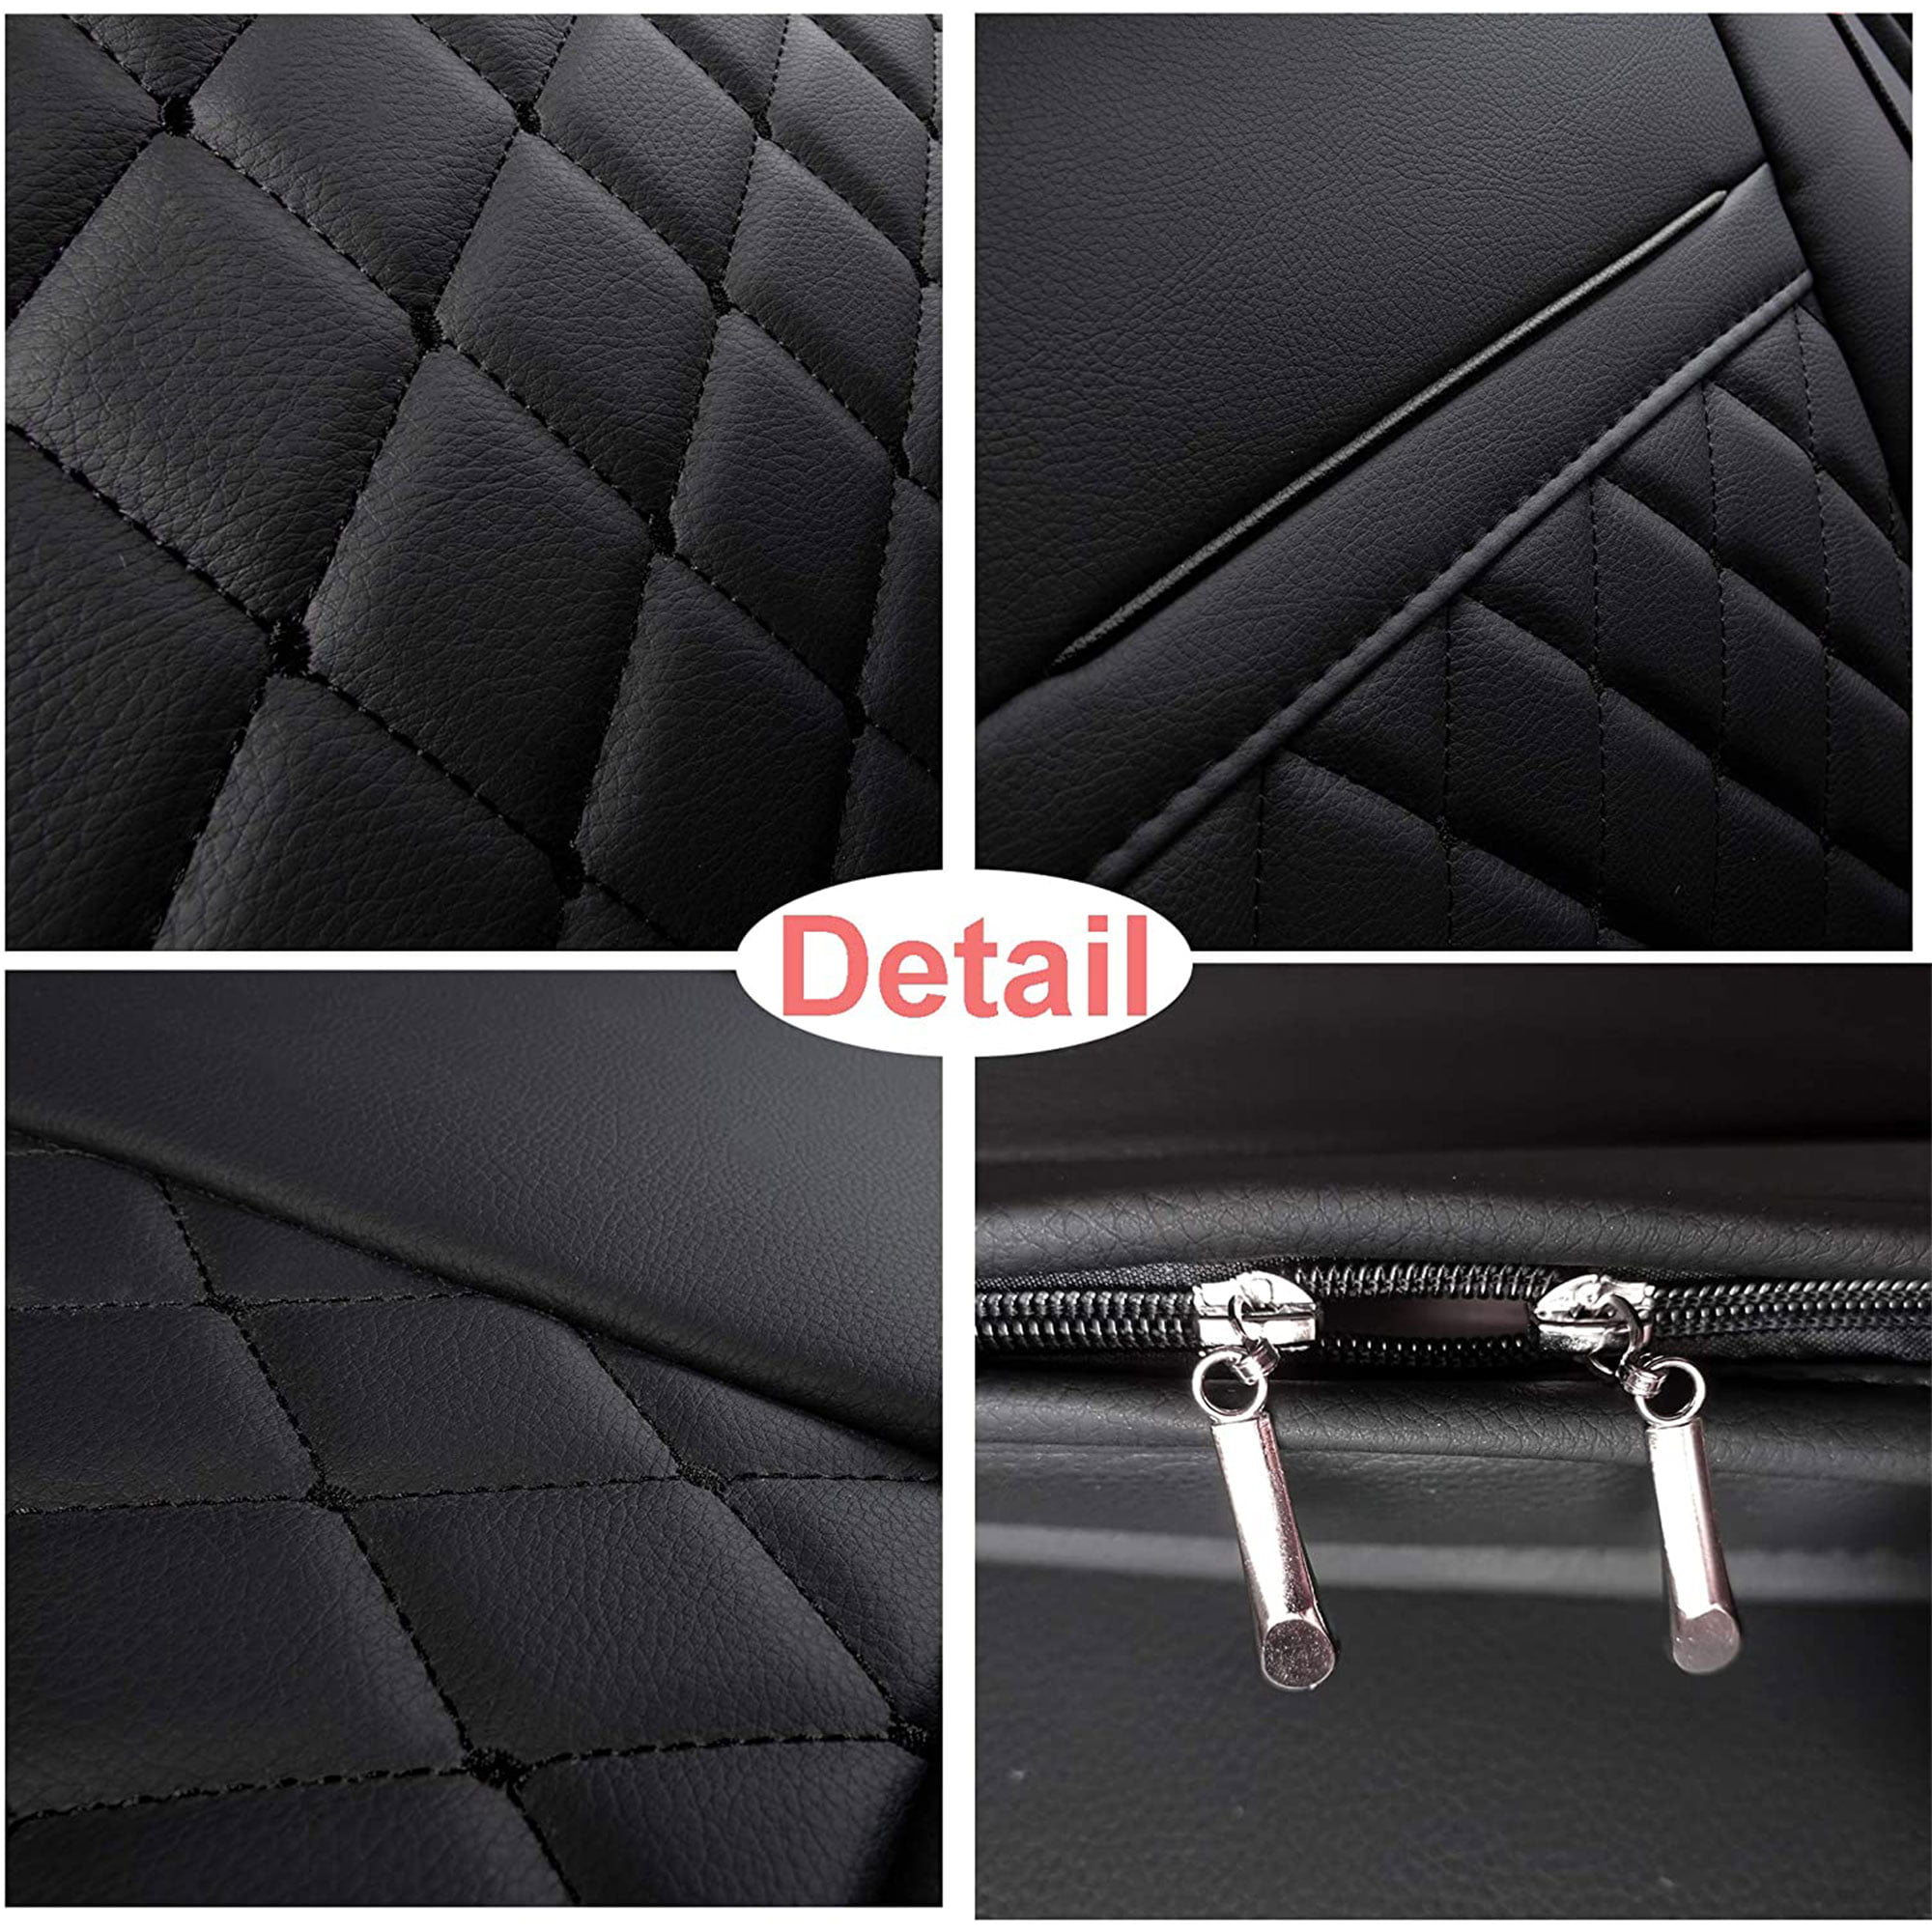 Only Rear Black Grid INCH EMPIRE Back Car Seat Cover Synthetic Leather Simple Style Universal Fit for Sedan Hatchback SUV Pickup Truck 